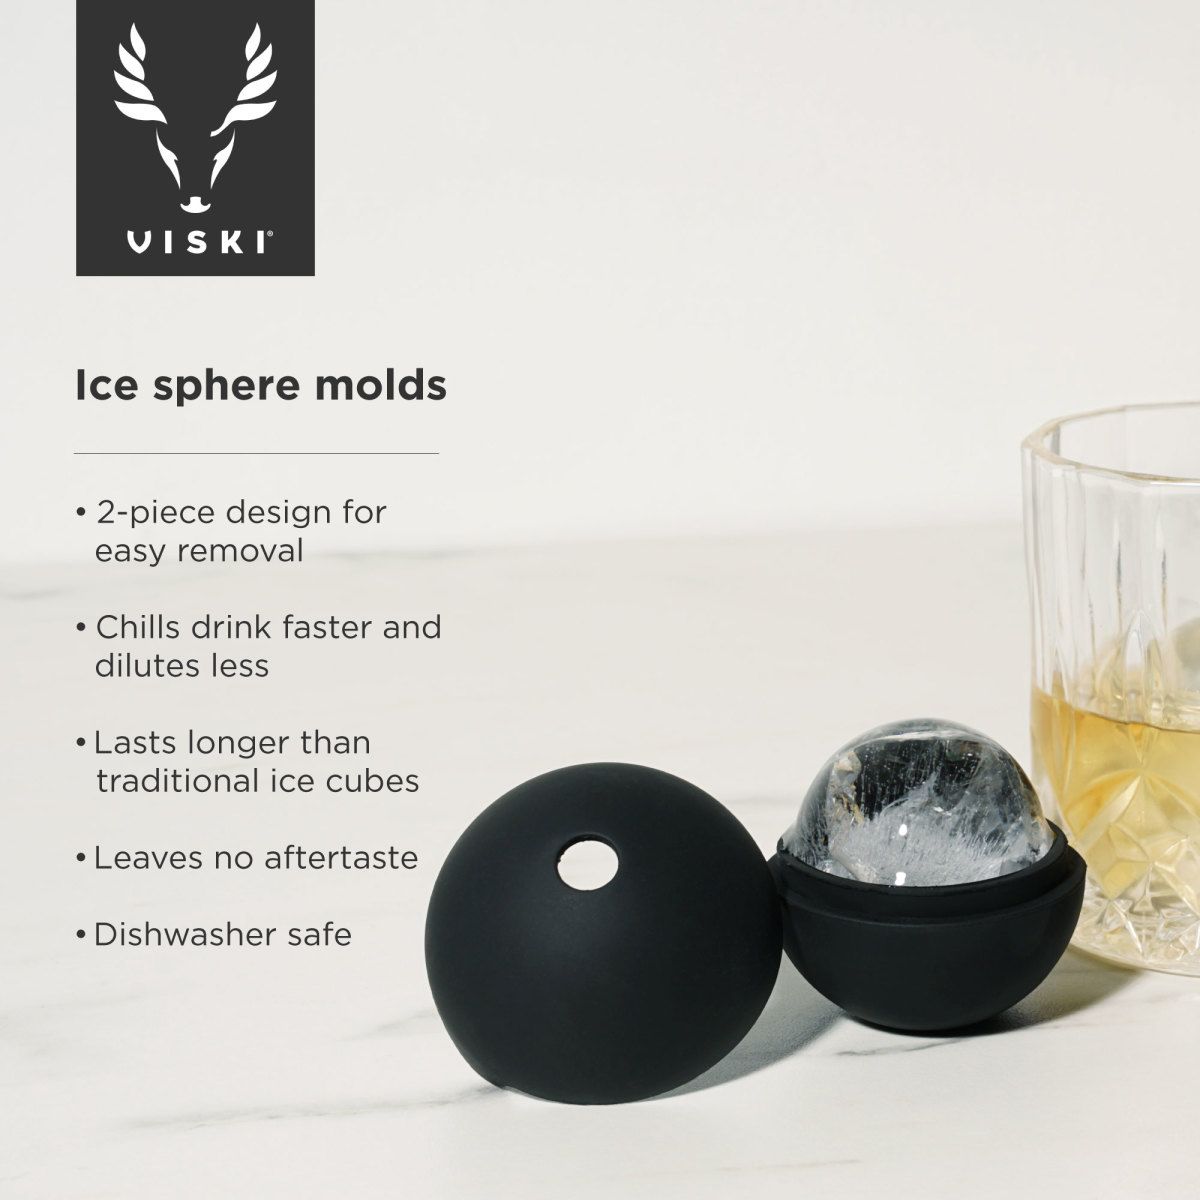 The Original Whiskey Ball Duo Gift Set (2 Round Ice Molds, 2 Libby